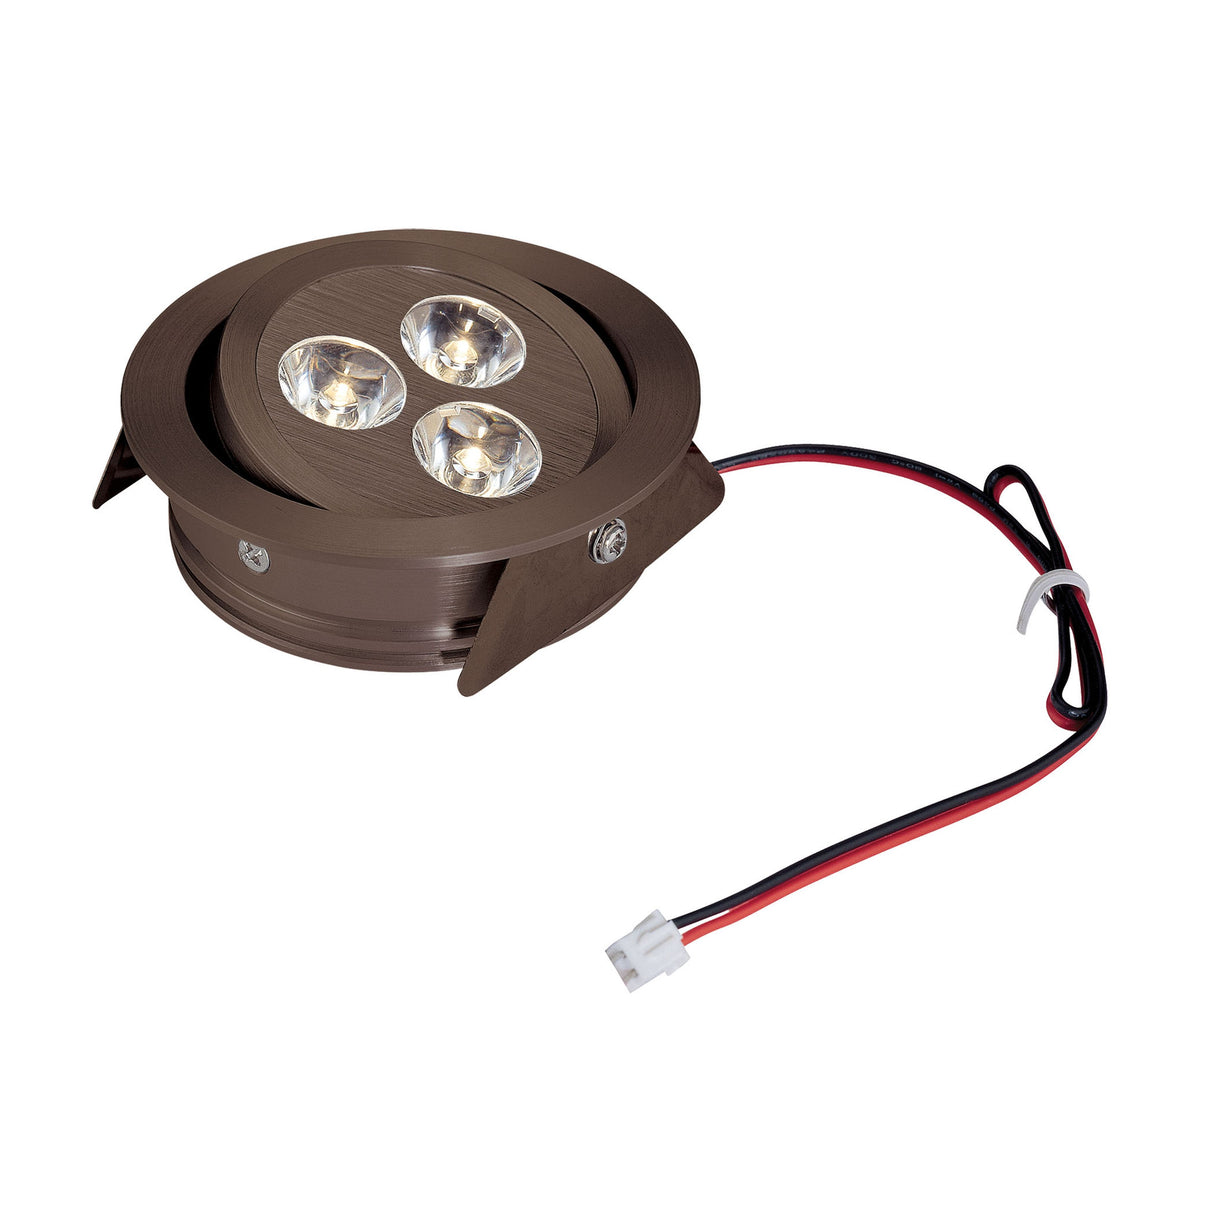 Elk WLE123C32K-0-45 Tiro3 3-Light Directional 31-Watt LED Downlight (without Driver) in Oiled Bronze with Clear Lens